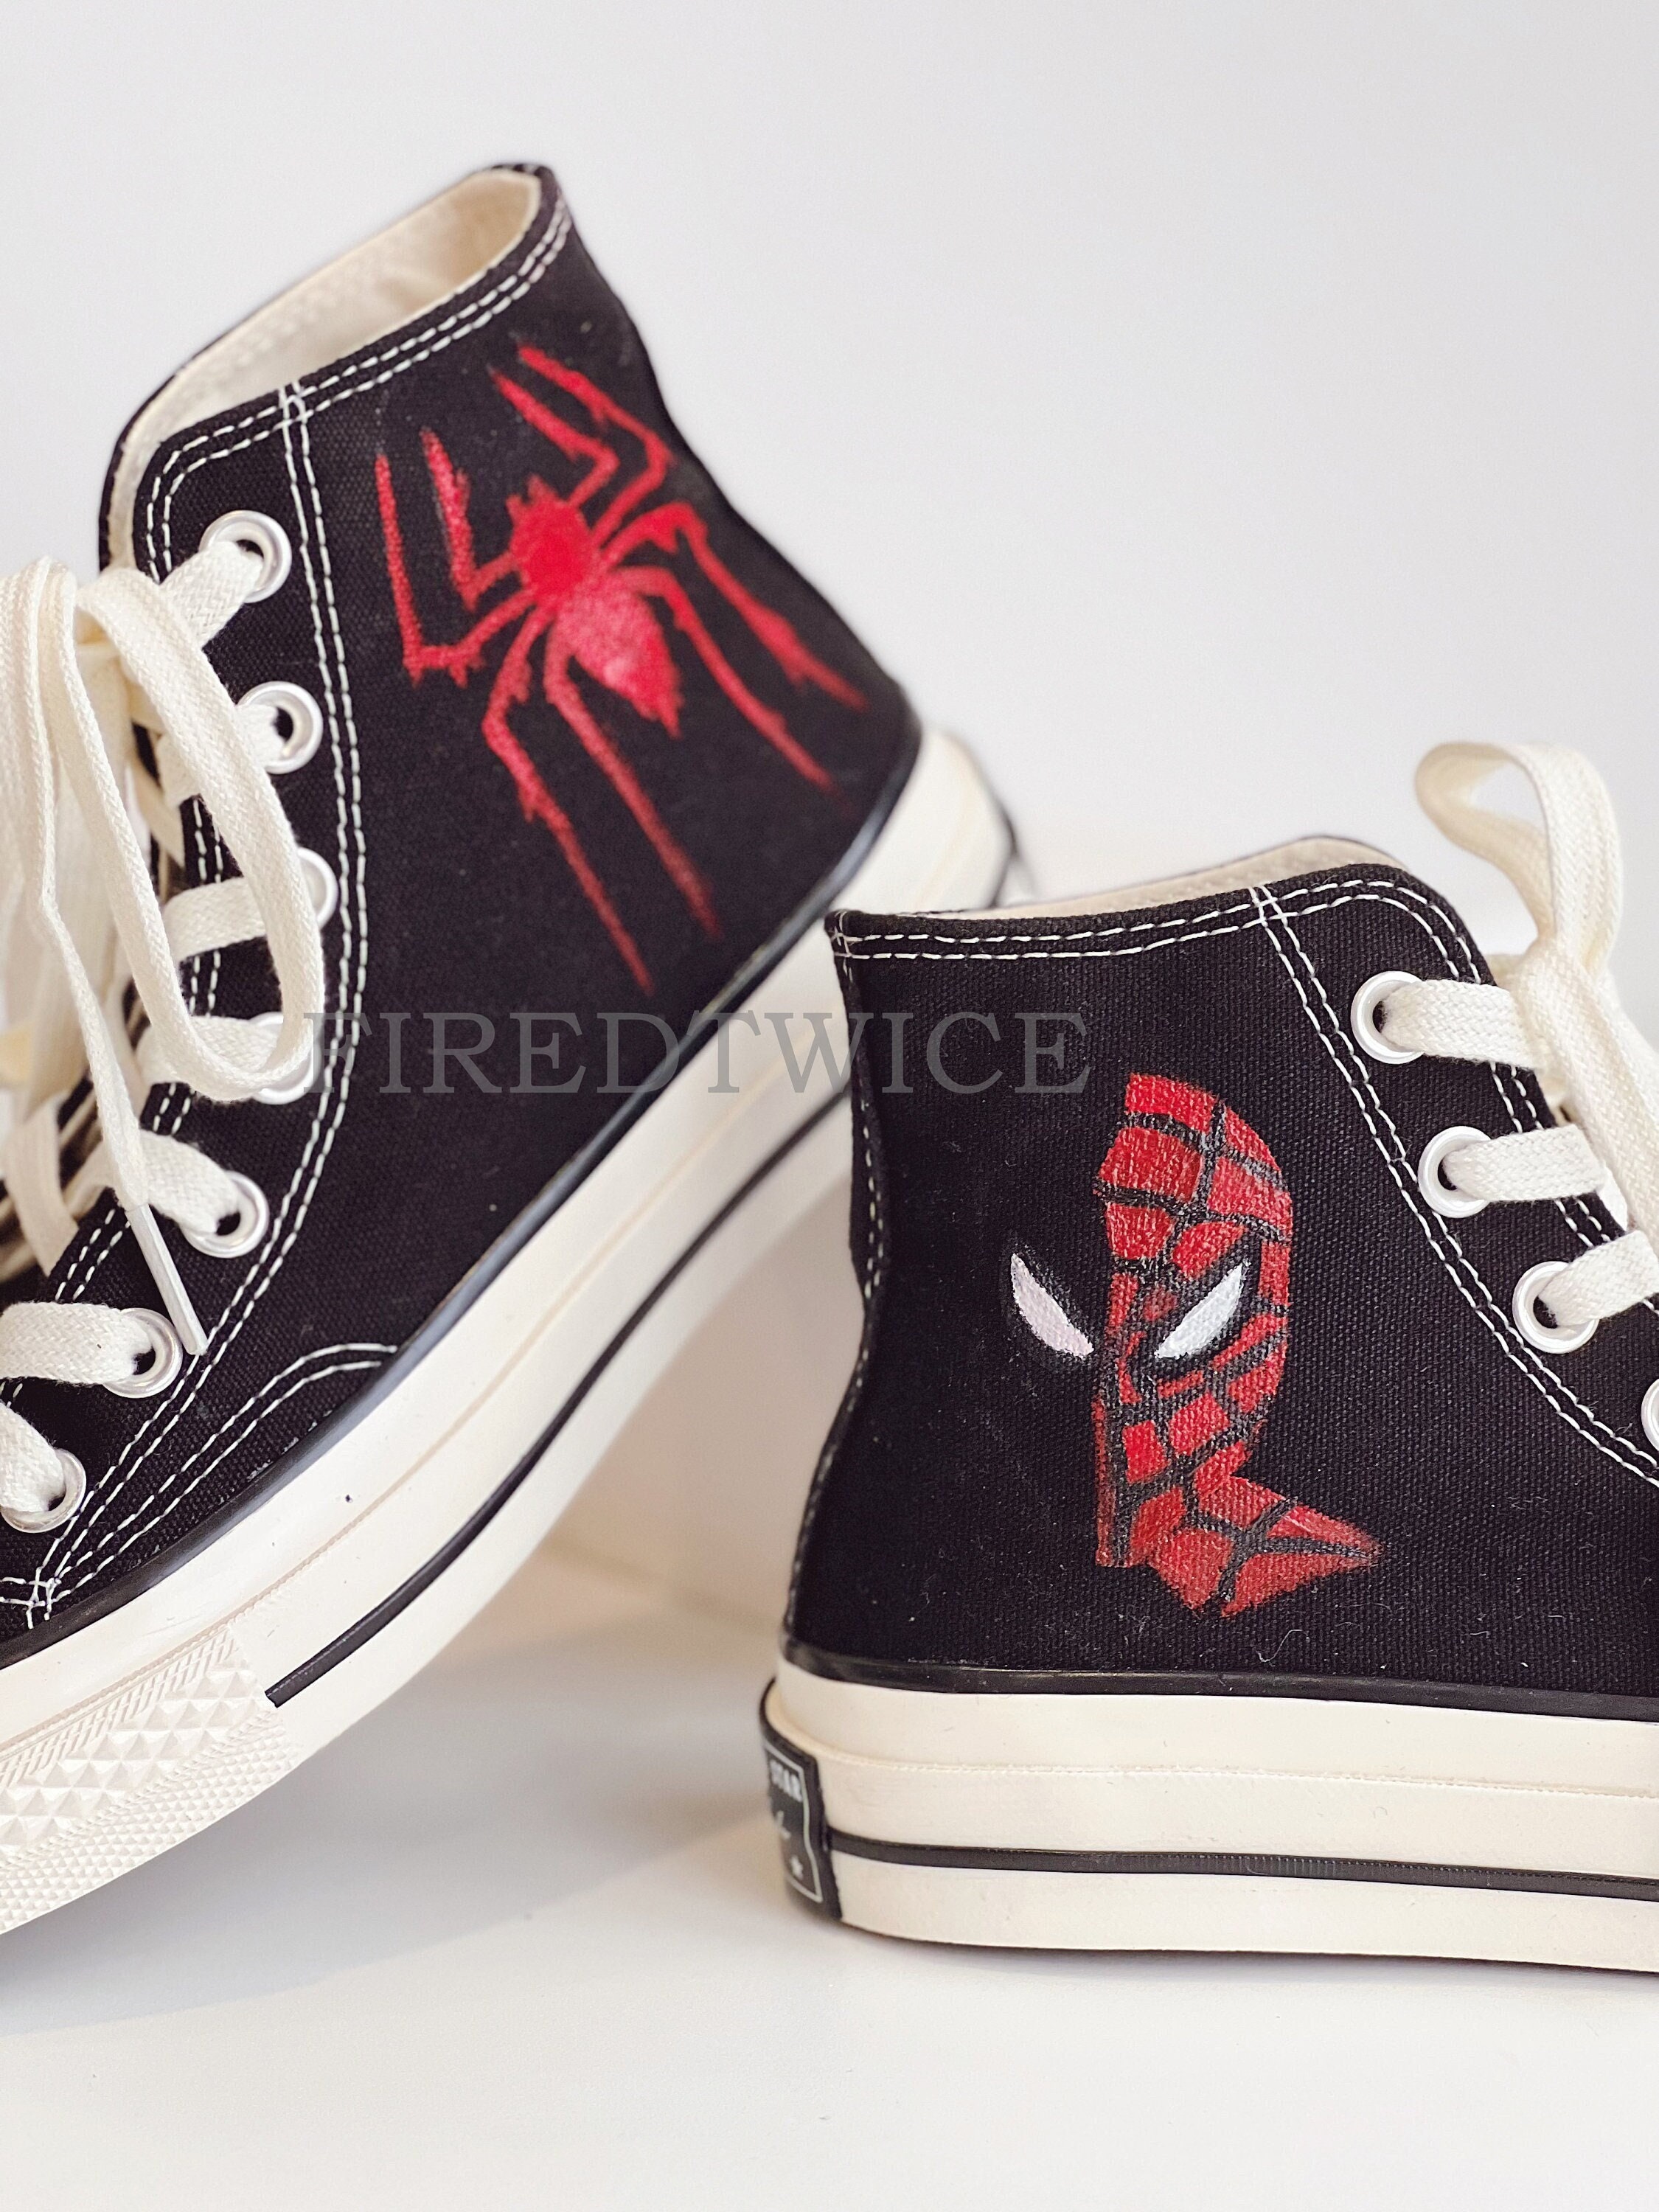 Spider Man Converse Painted Spider Mask Painting Shoes - Etsy